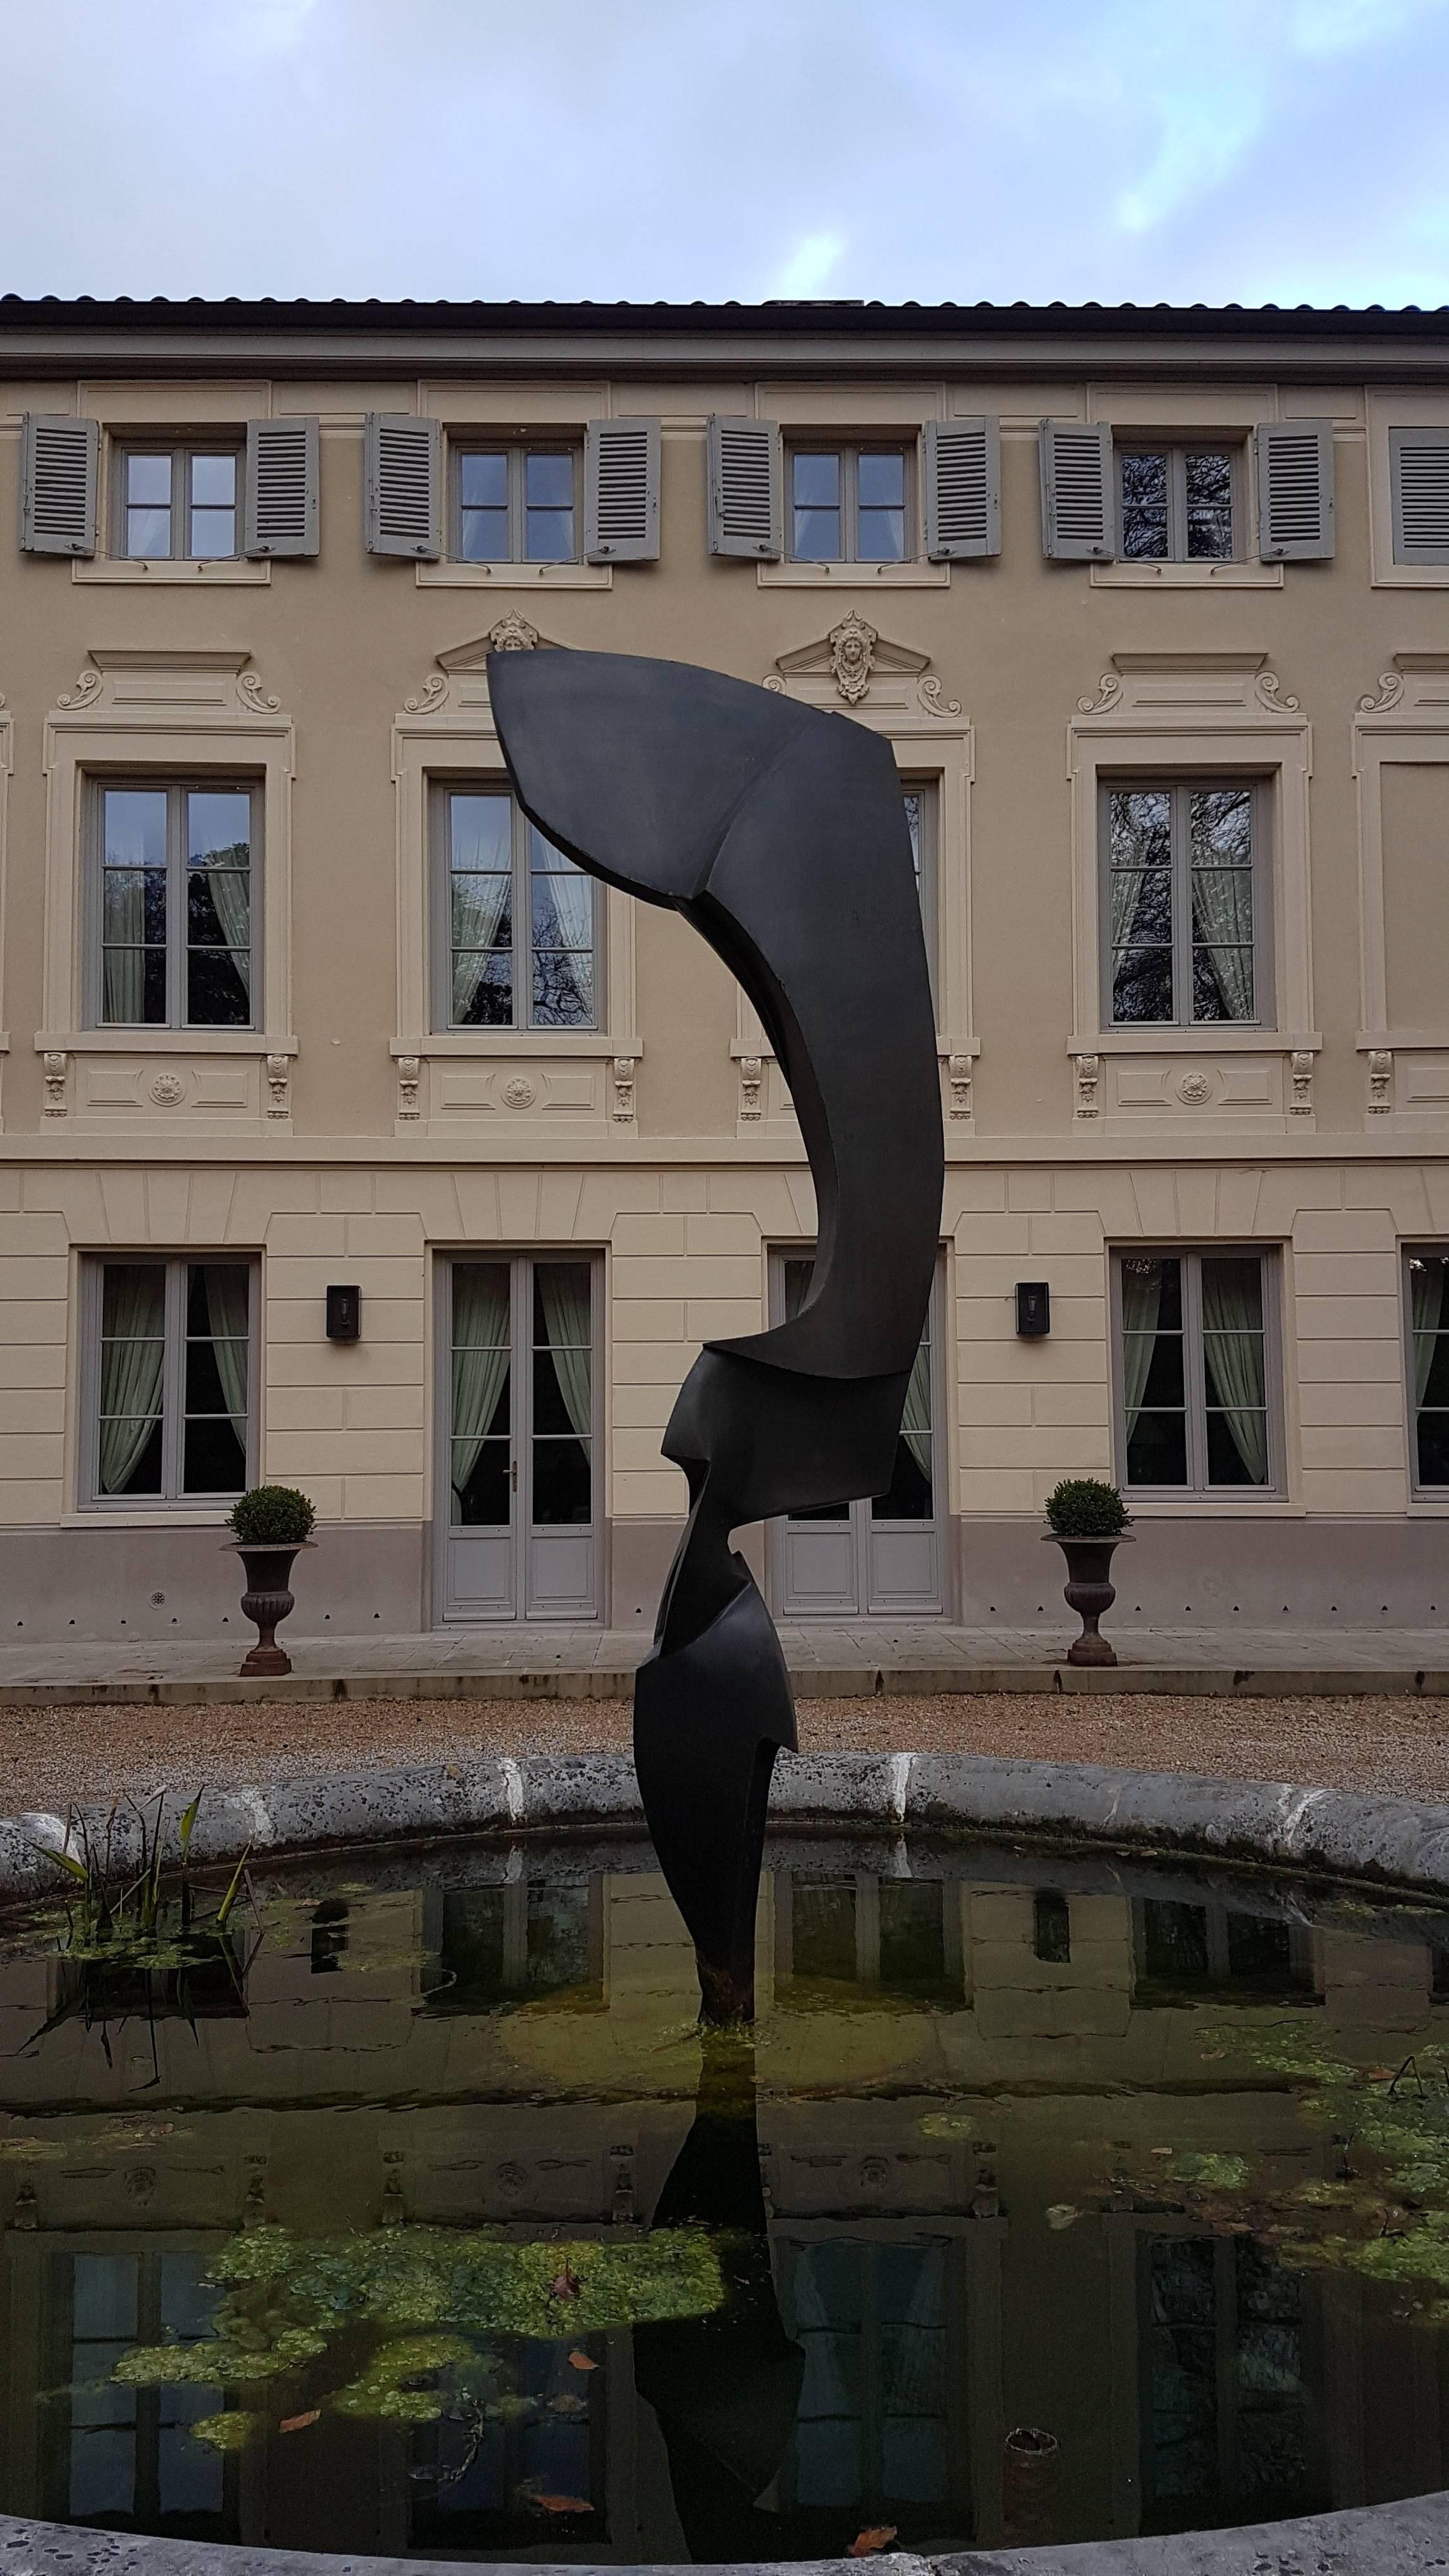 A superb and monumental sculpture by Cyrille Husson, 2016, made of steel.